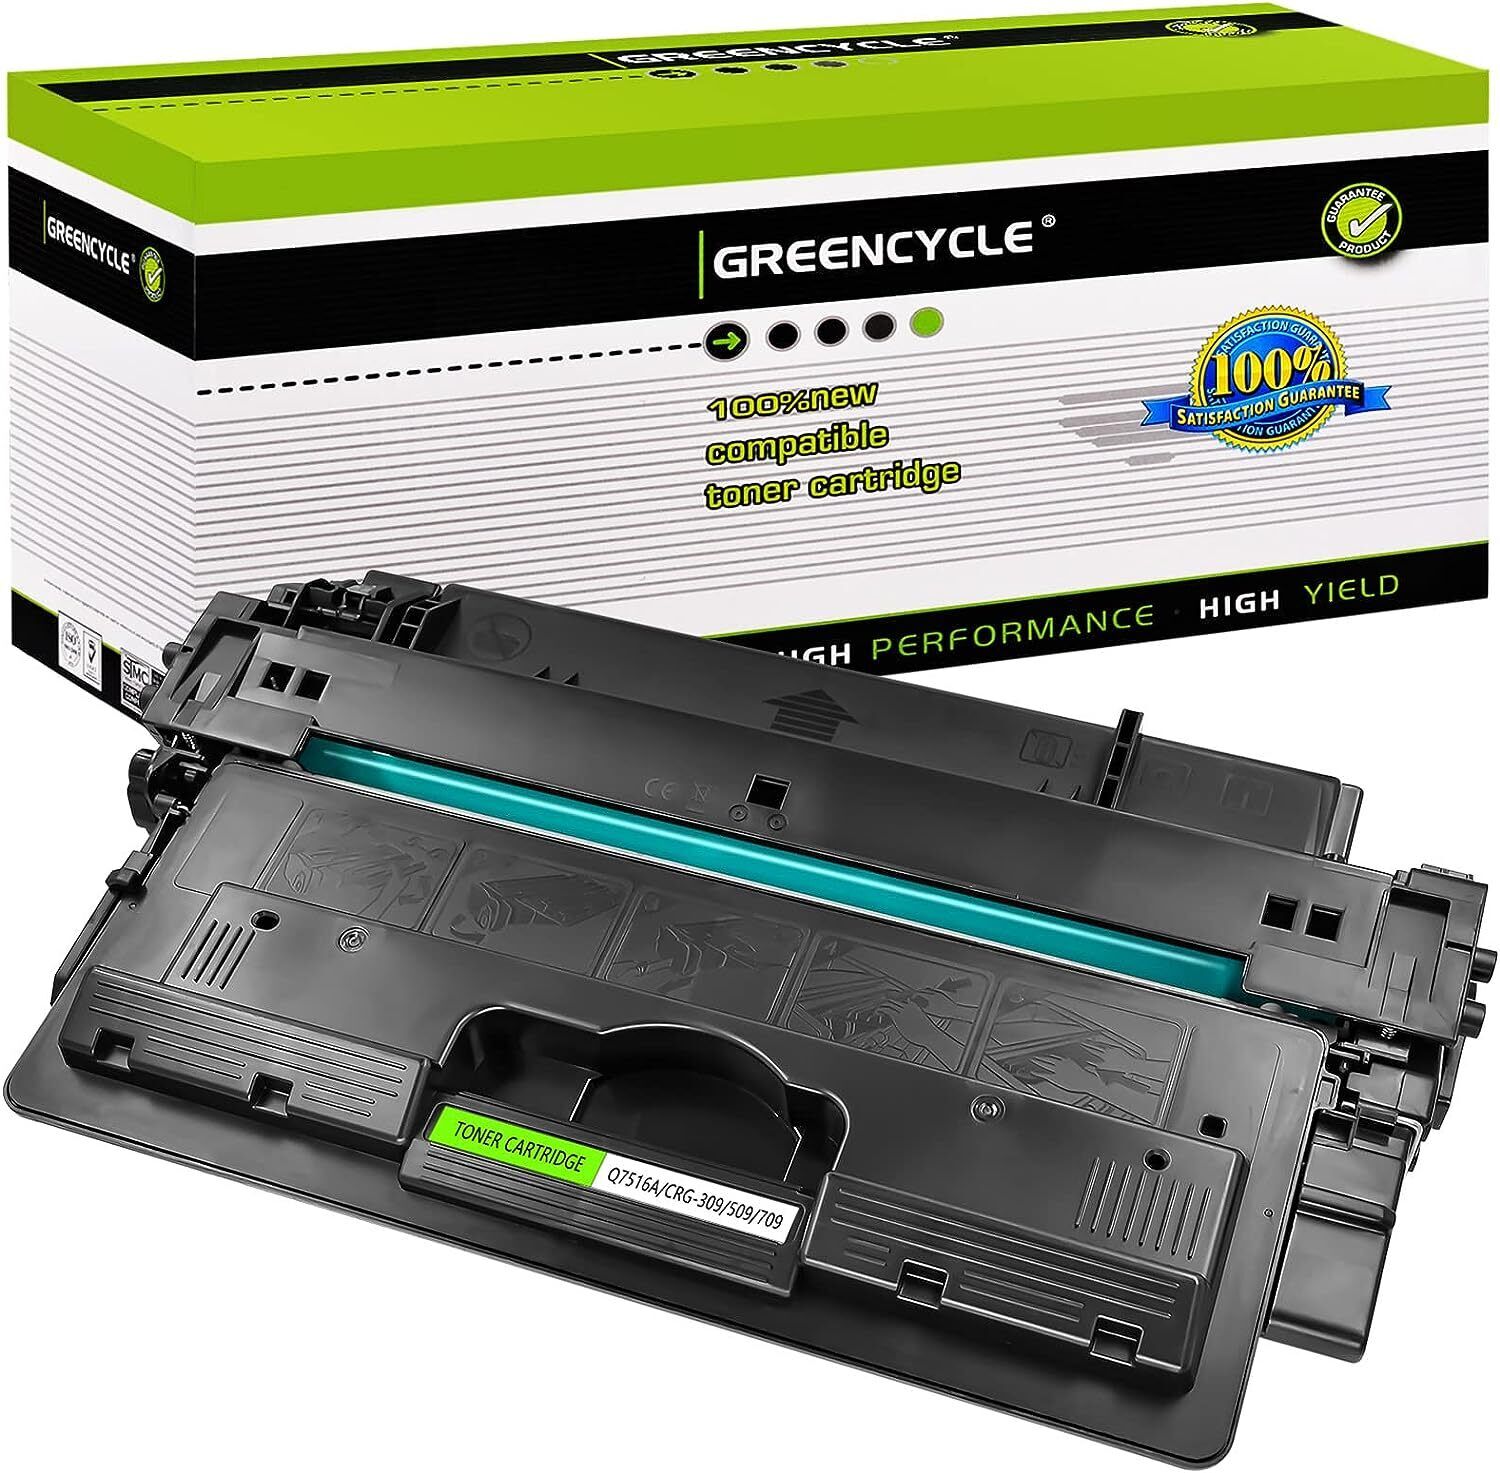 1PK Greencycle Toner Compatible for HP 16A Q7516A use in LaserJet 5200/5200DTN